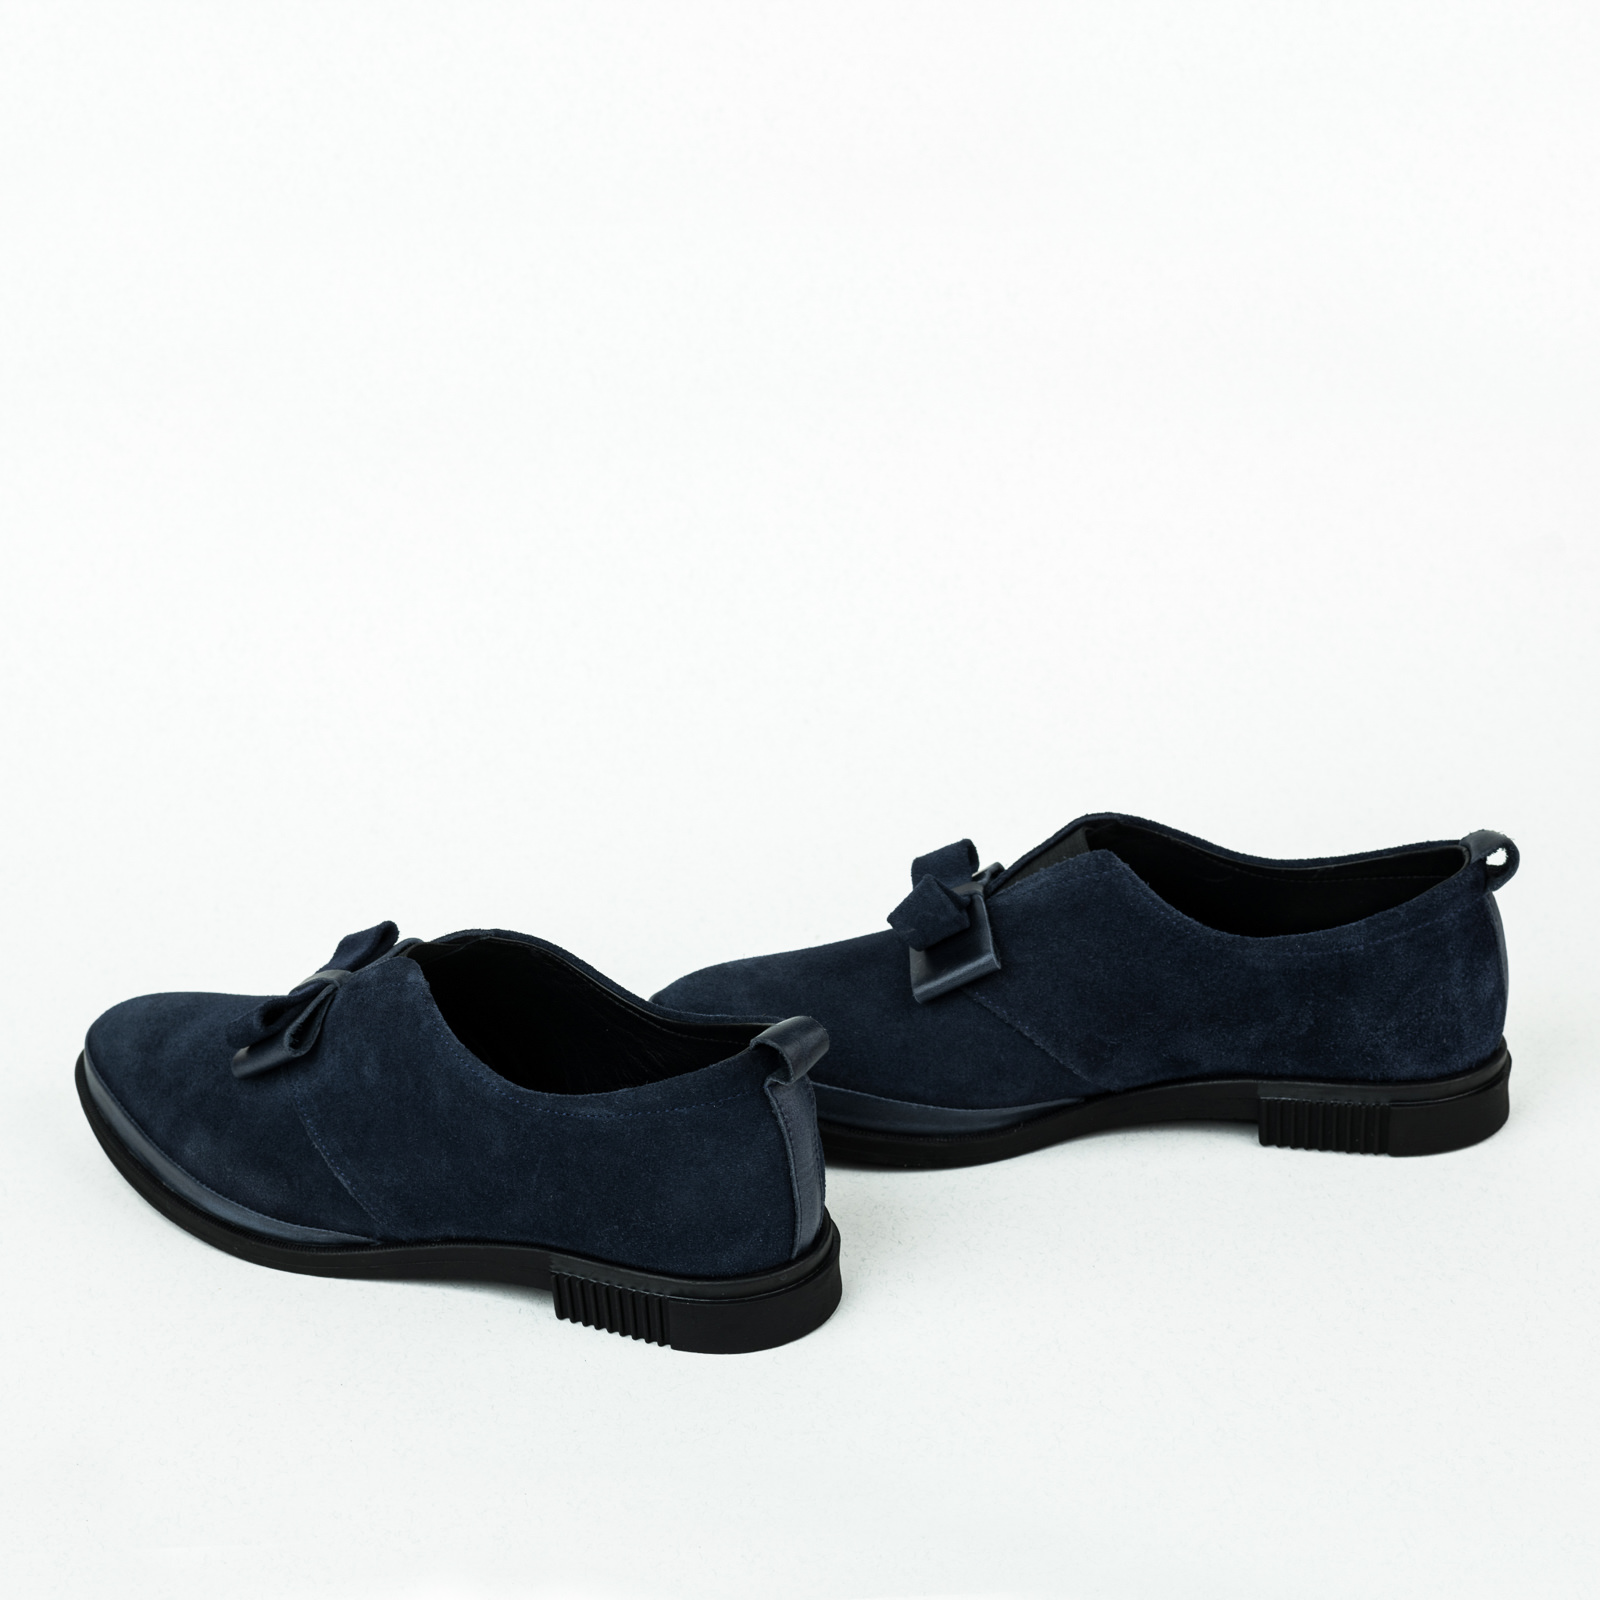 Leather shoes & flats B016 - NAVY